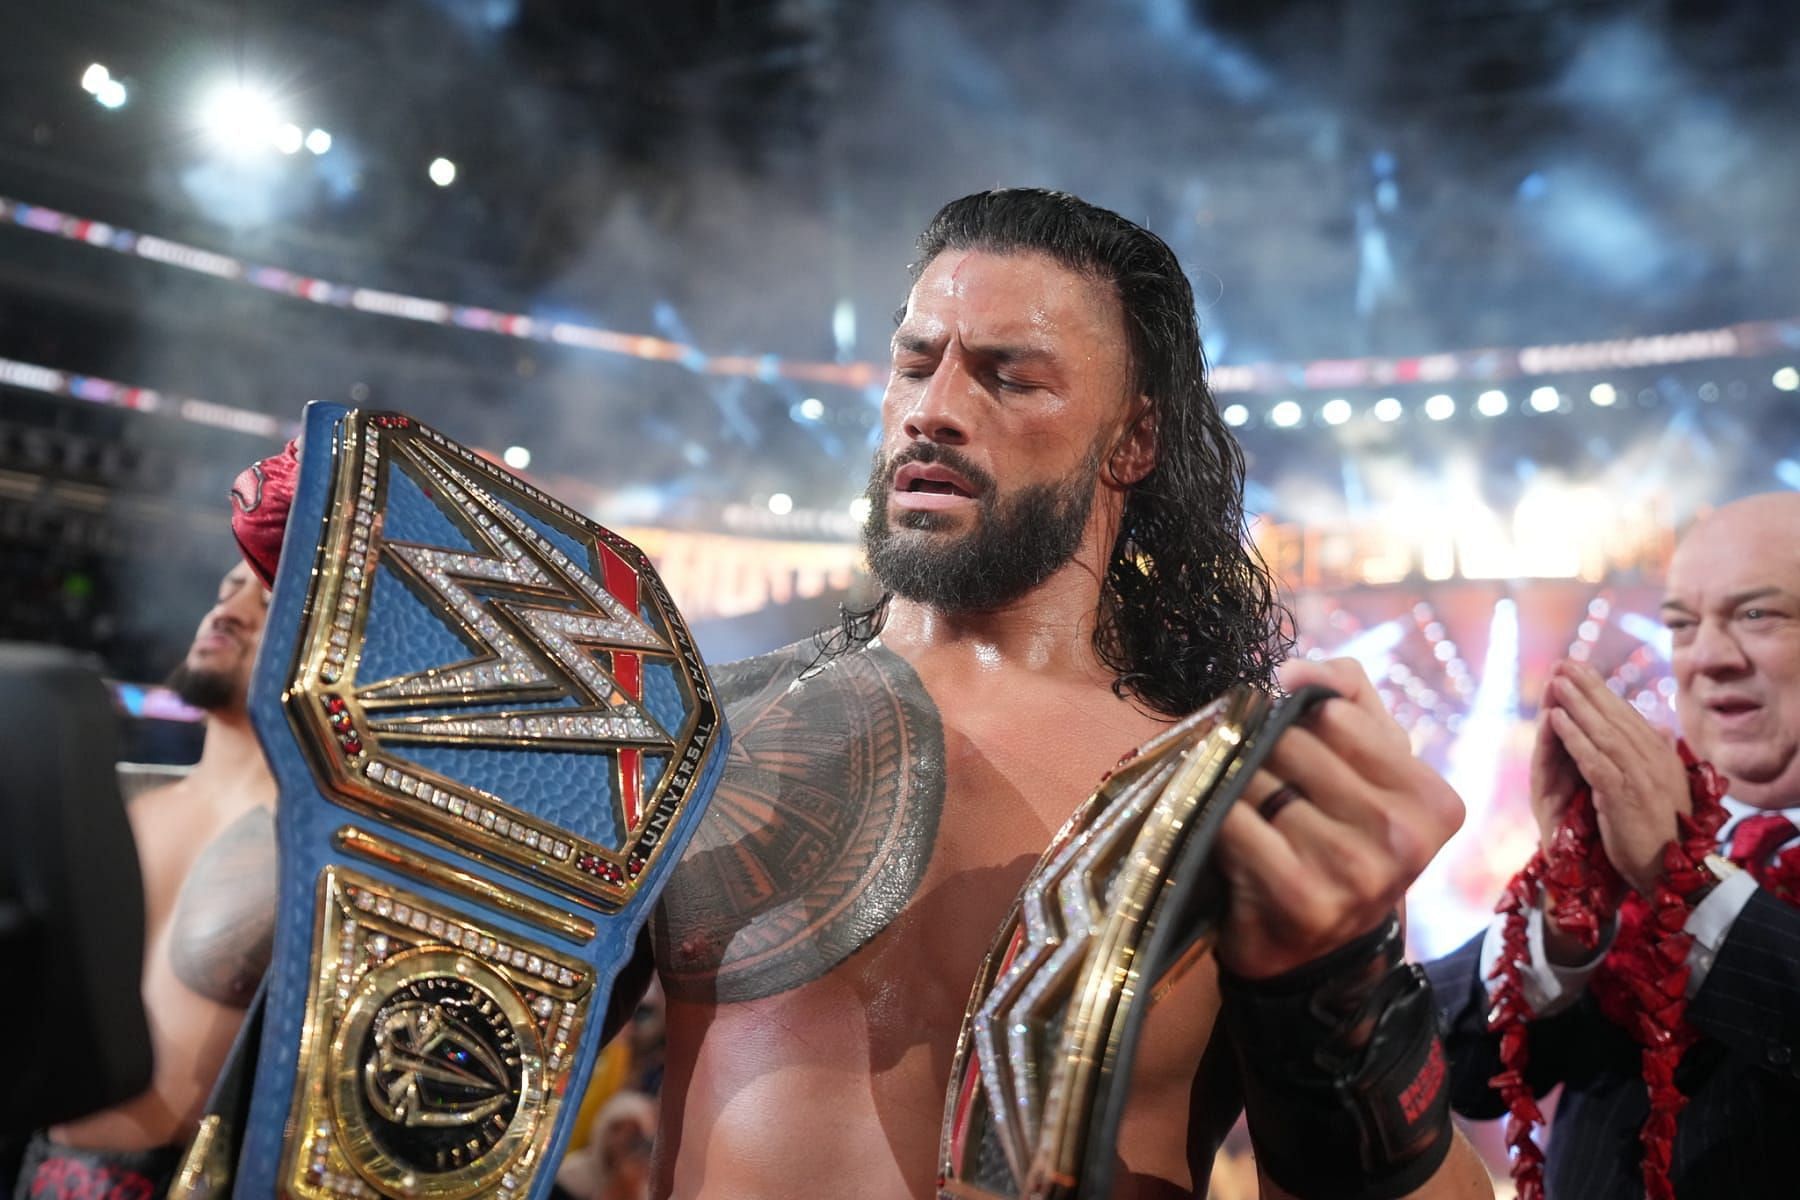 Roman Reigns has been atop WWE for the last two years.